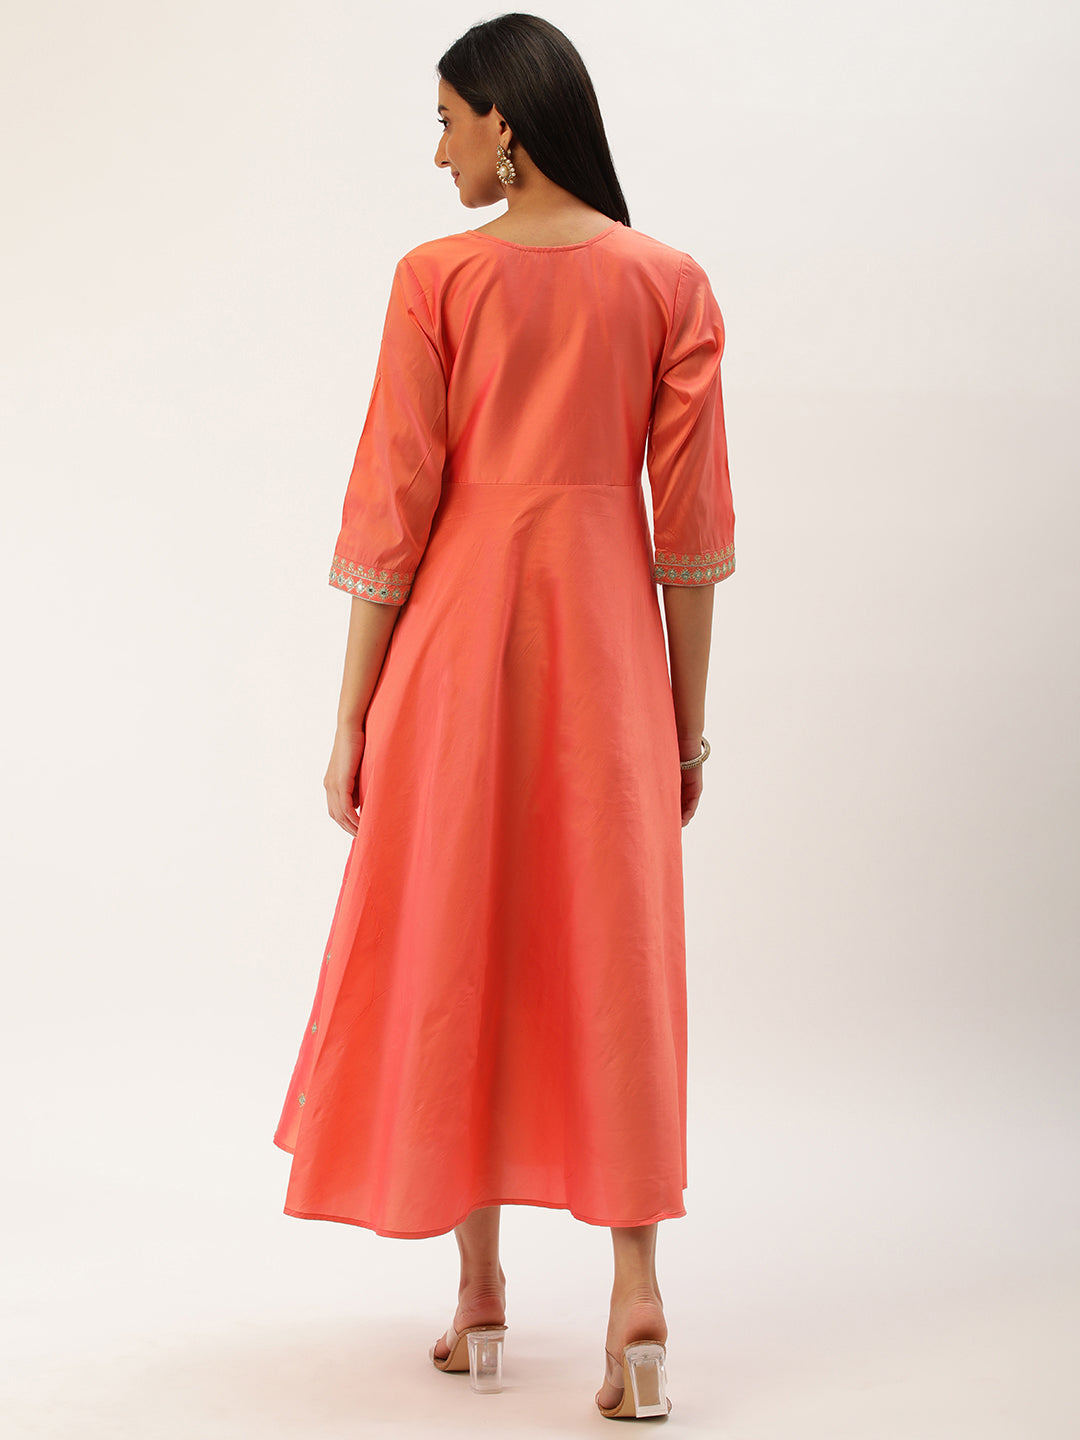 PEACH TAFETA EMBROIDERED WORK GOWN